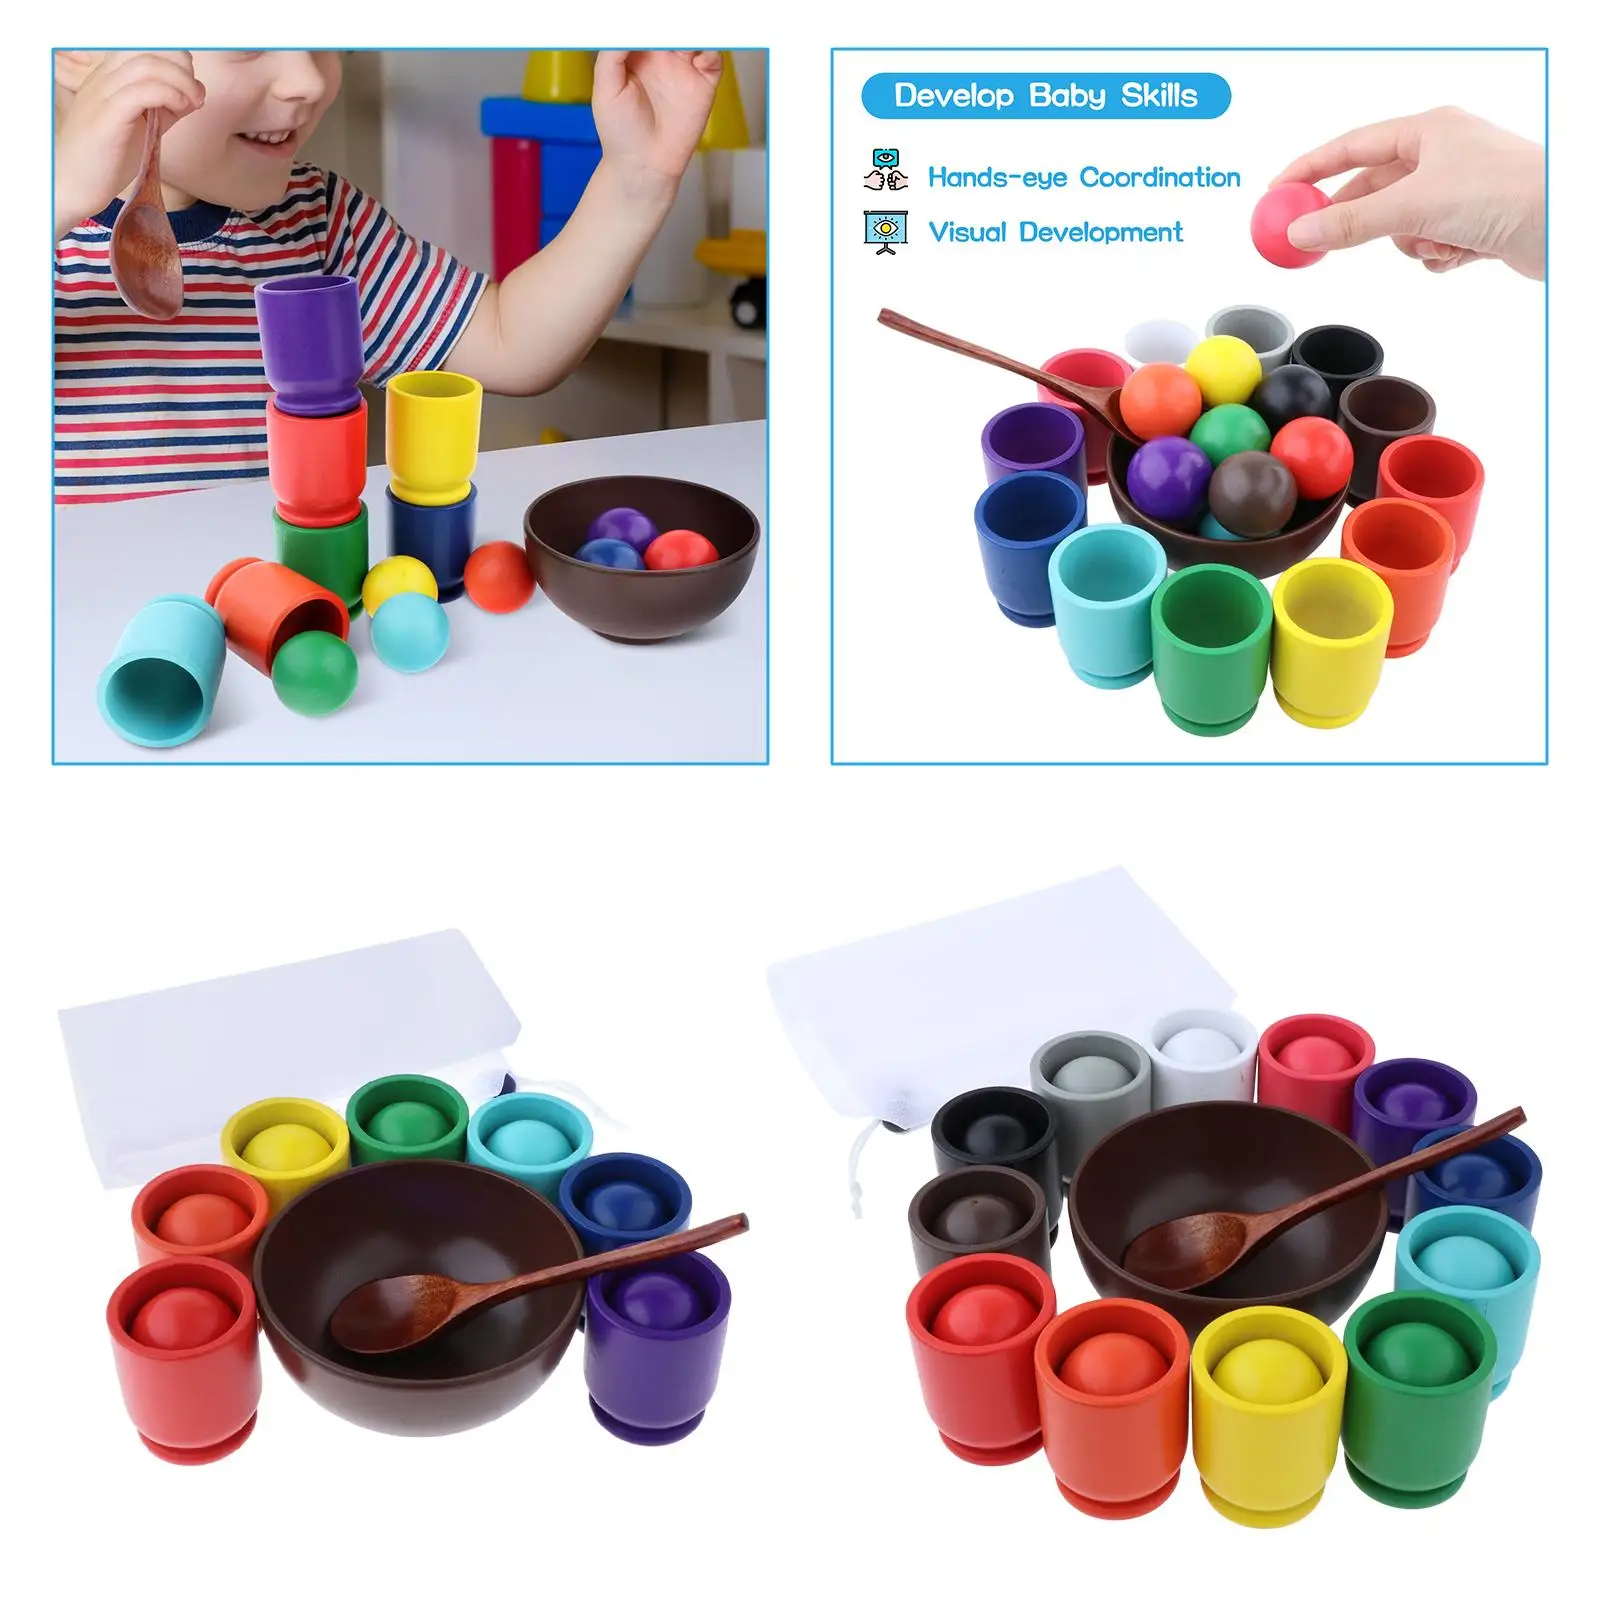 Rainbow Balls in Cups Montessori Baby Educational Toys Matching and Counting Toy Preschool Learning Toy for Boys Girls Kids